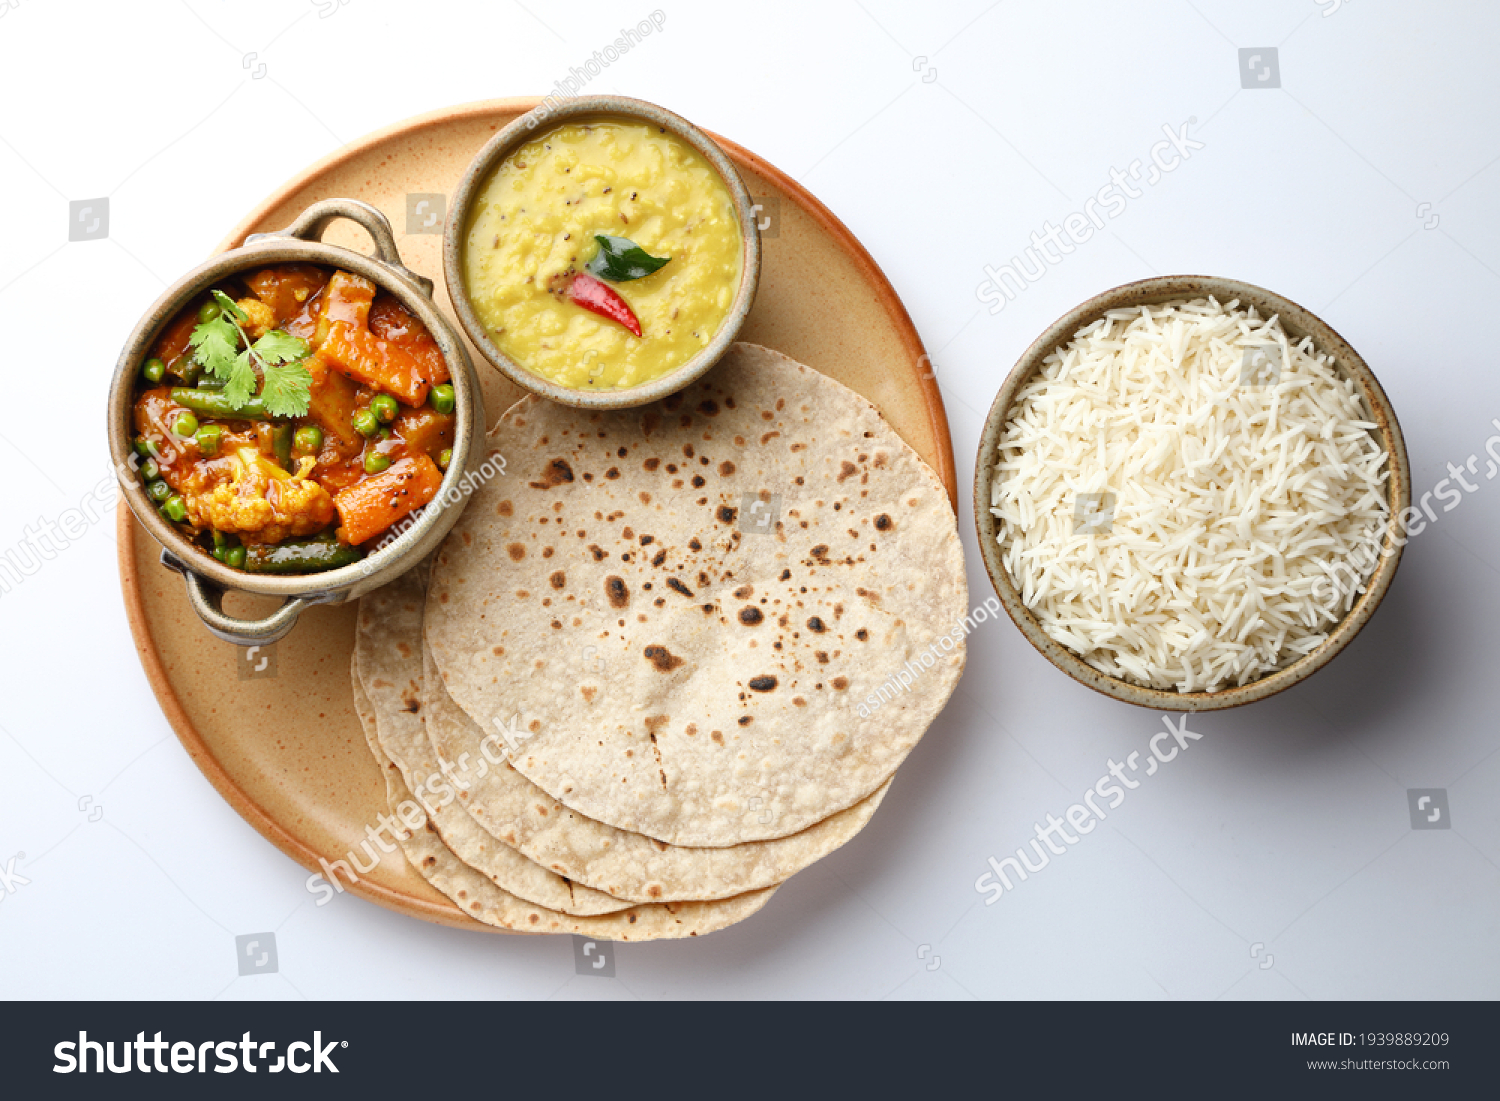 vegetarian Indian thali or Indian home food with lentil dal, cauliflower curry, roti or Indian flat bread and rice #1939889209